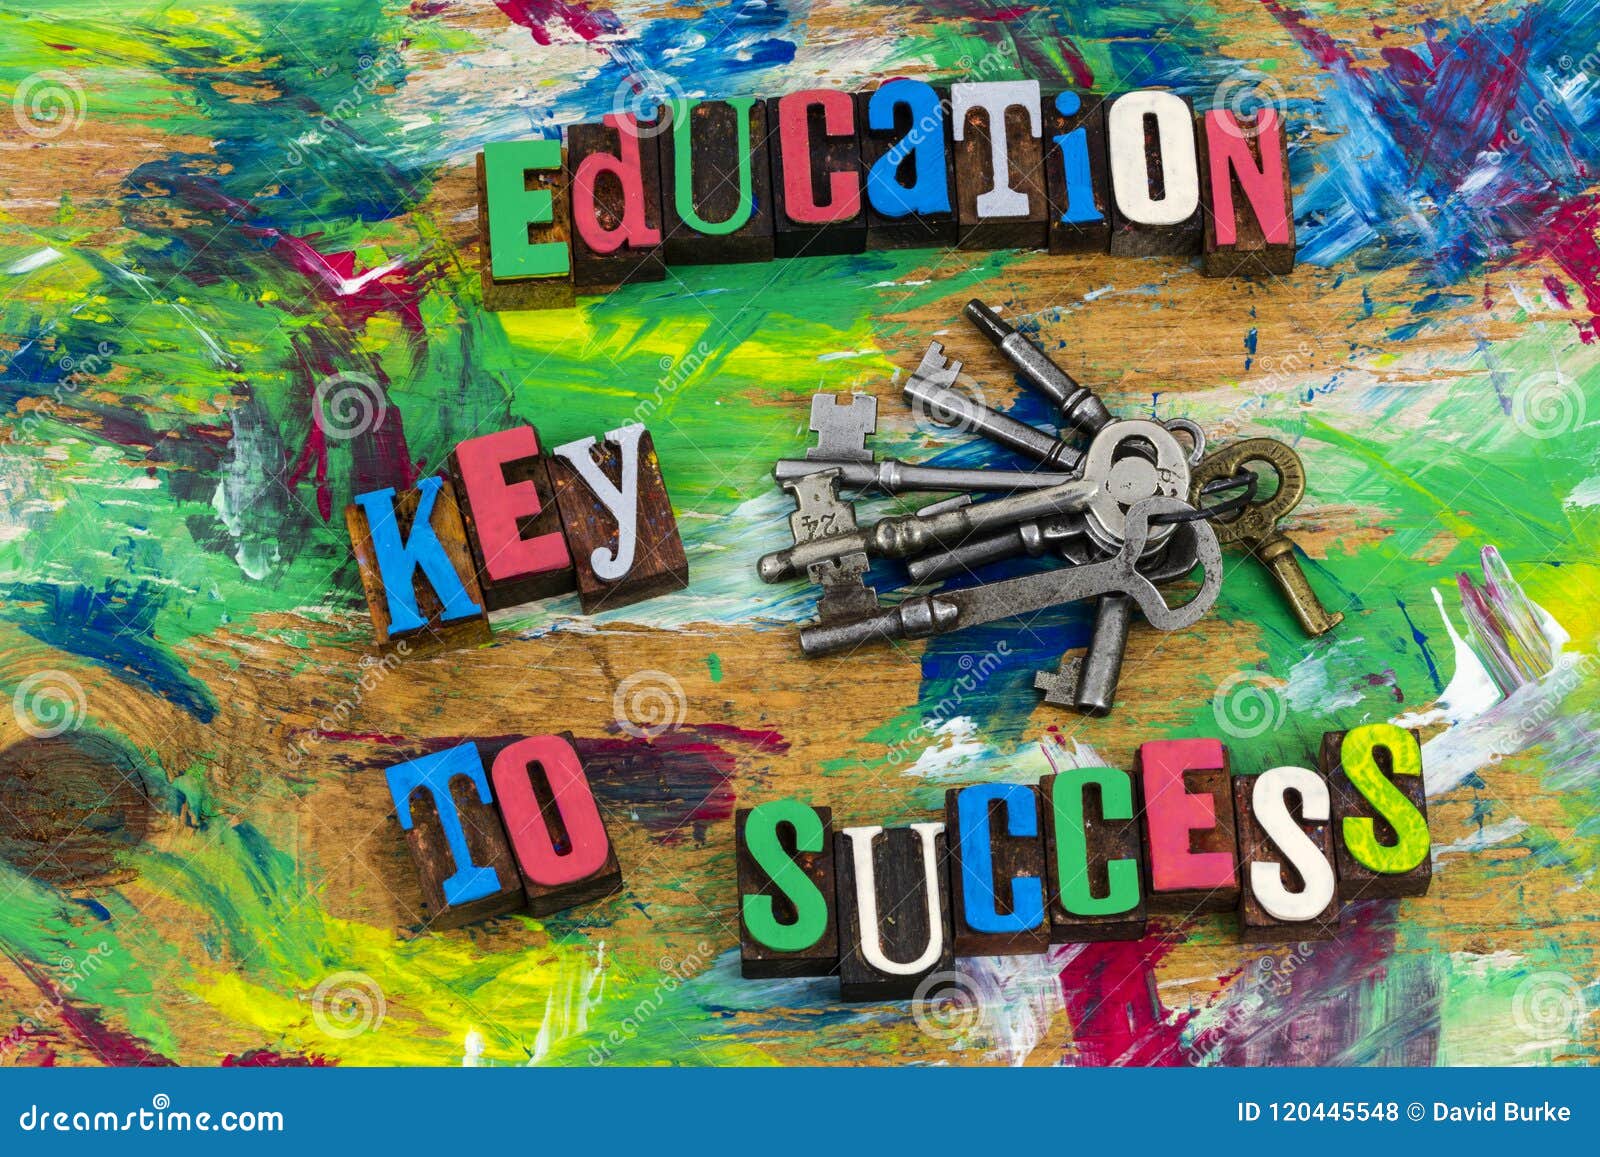 is education really the key to success